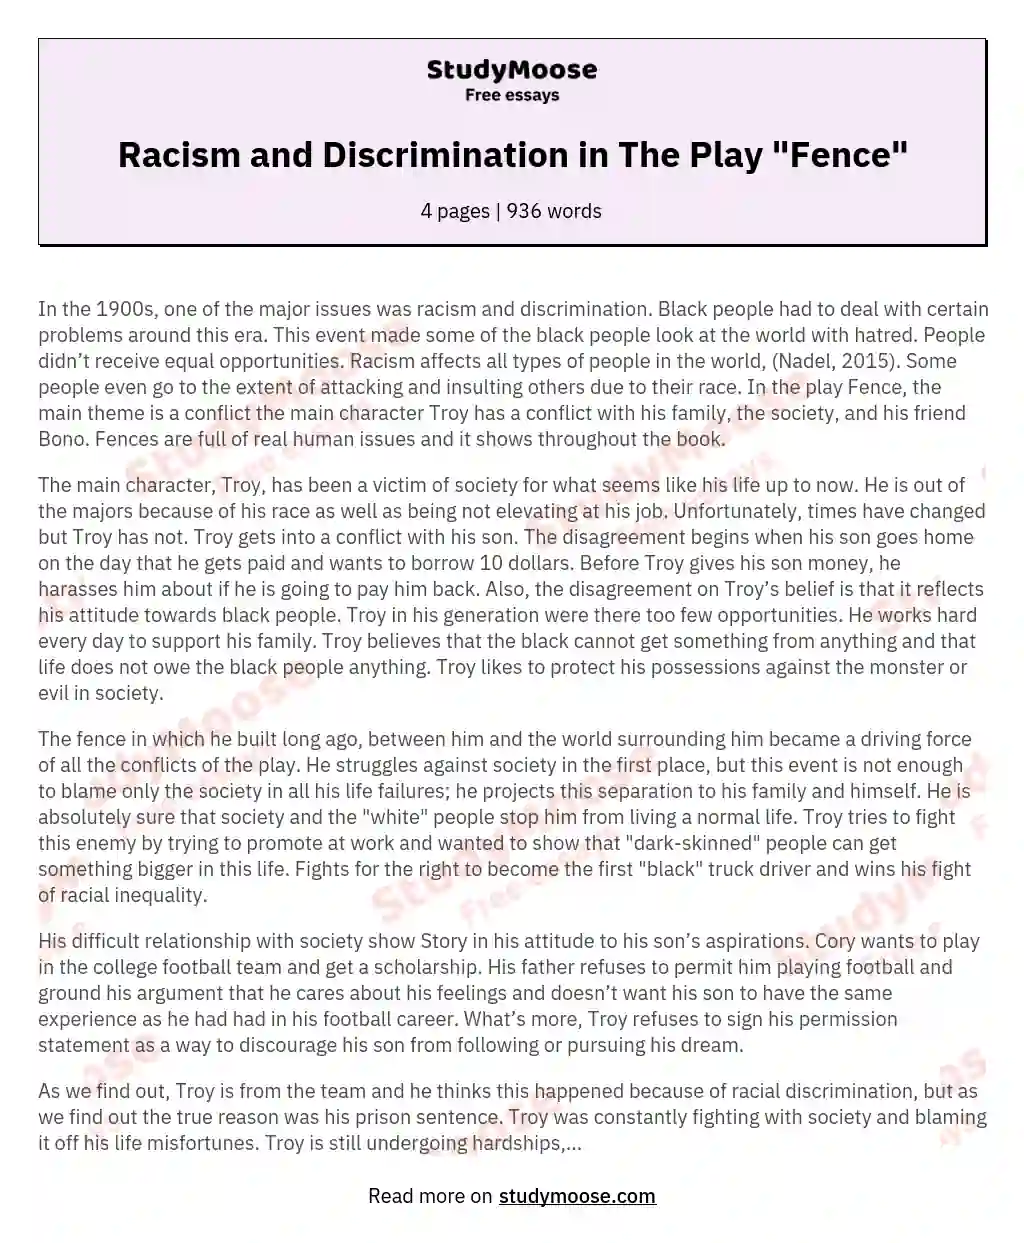 Racism and Discrimination in The Play "Fence" essay